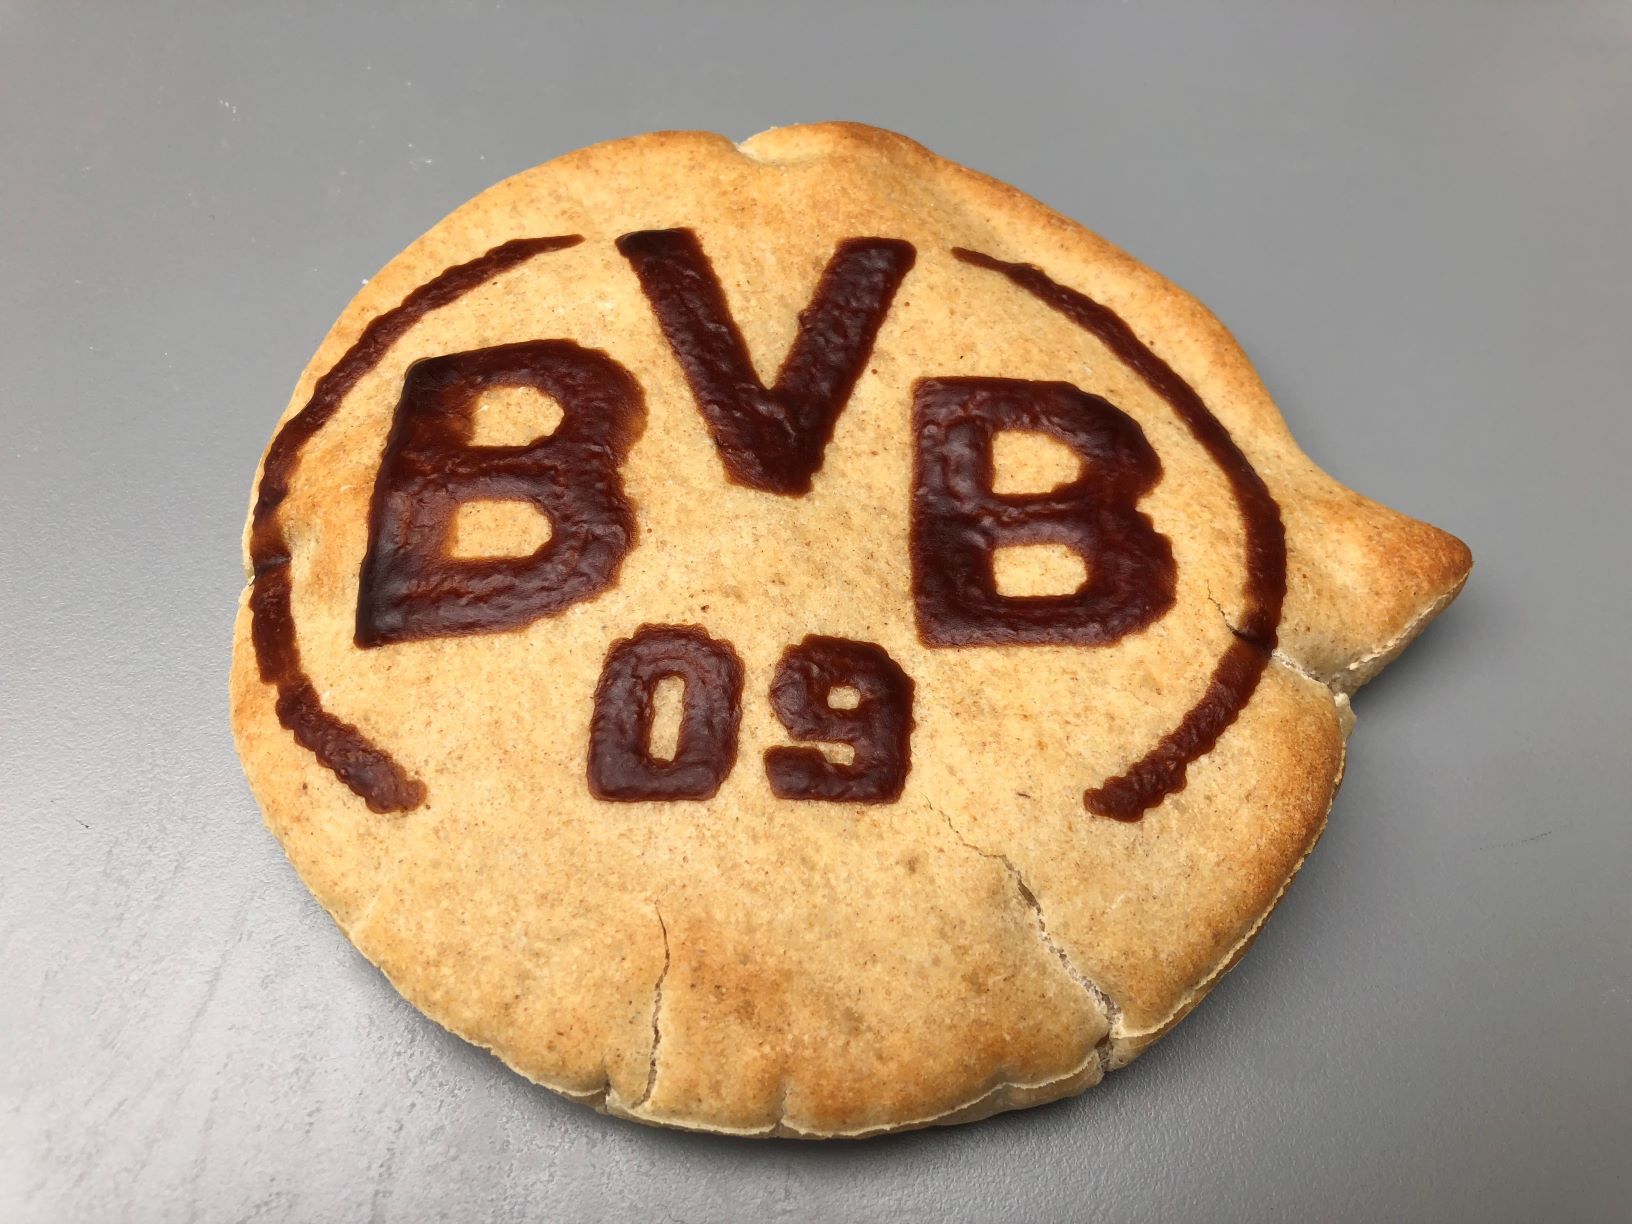 Bun decorated with BVB logo made with RudinJet by FoodJet bread decorator